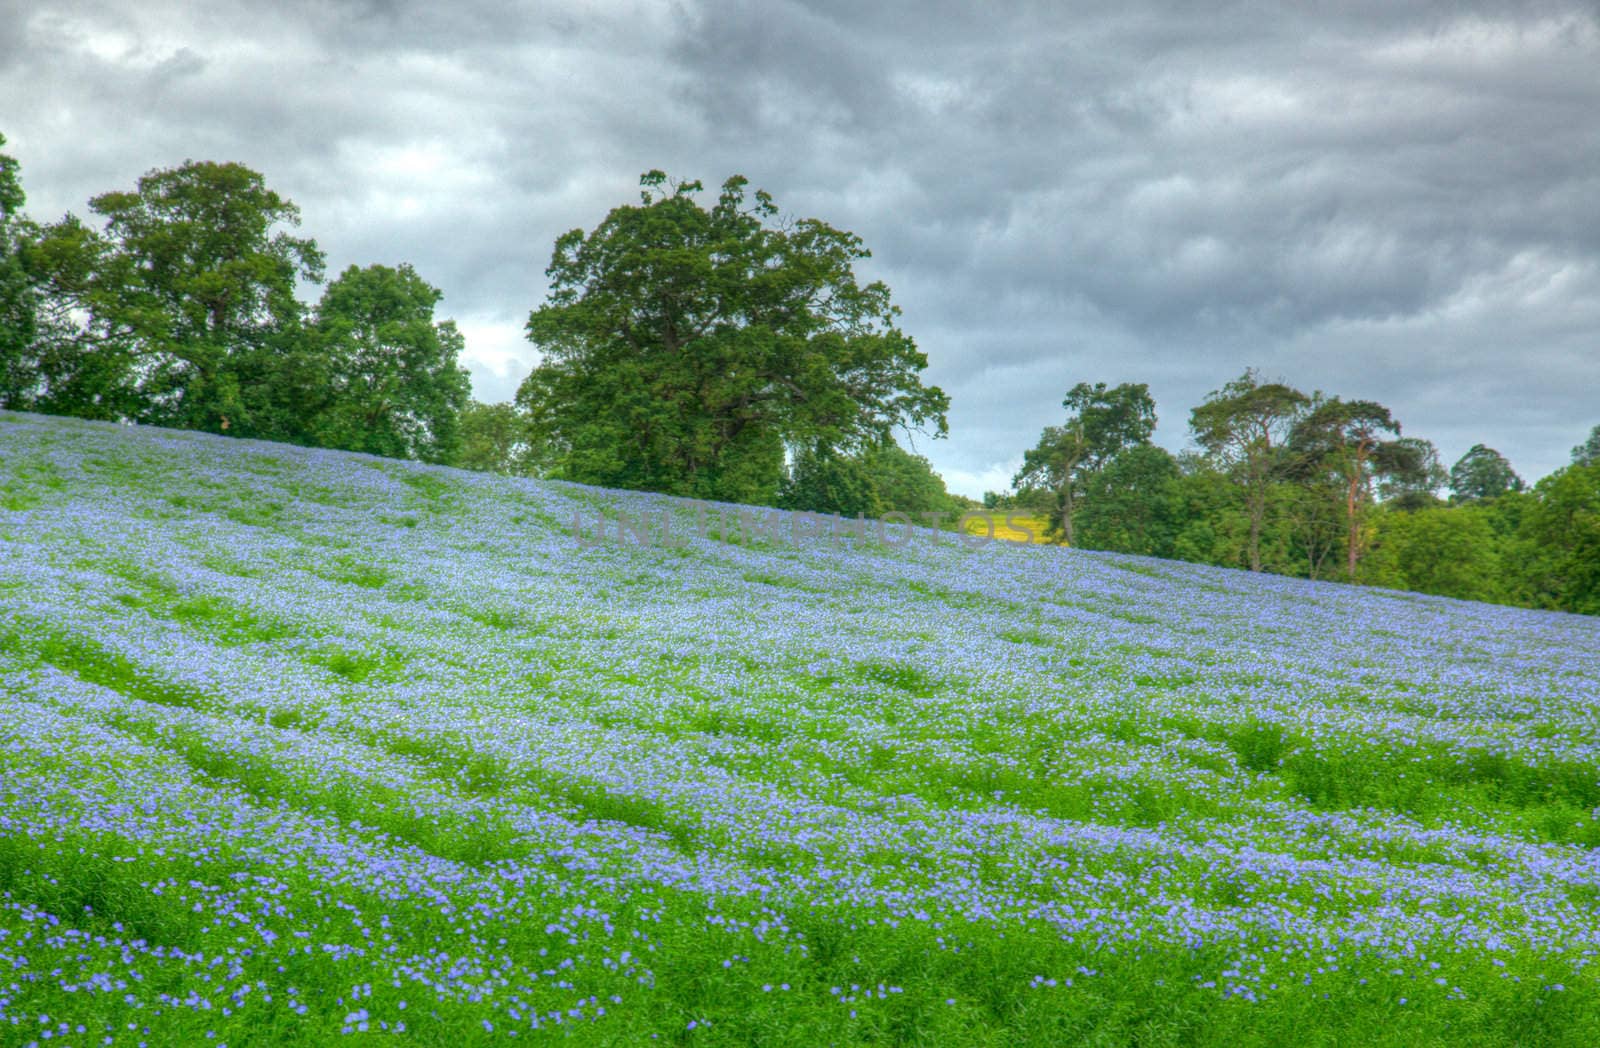 Lavender field outside of Chipping Campden in England's Cotswolds